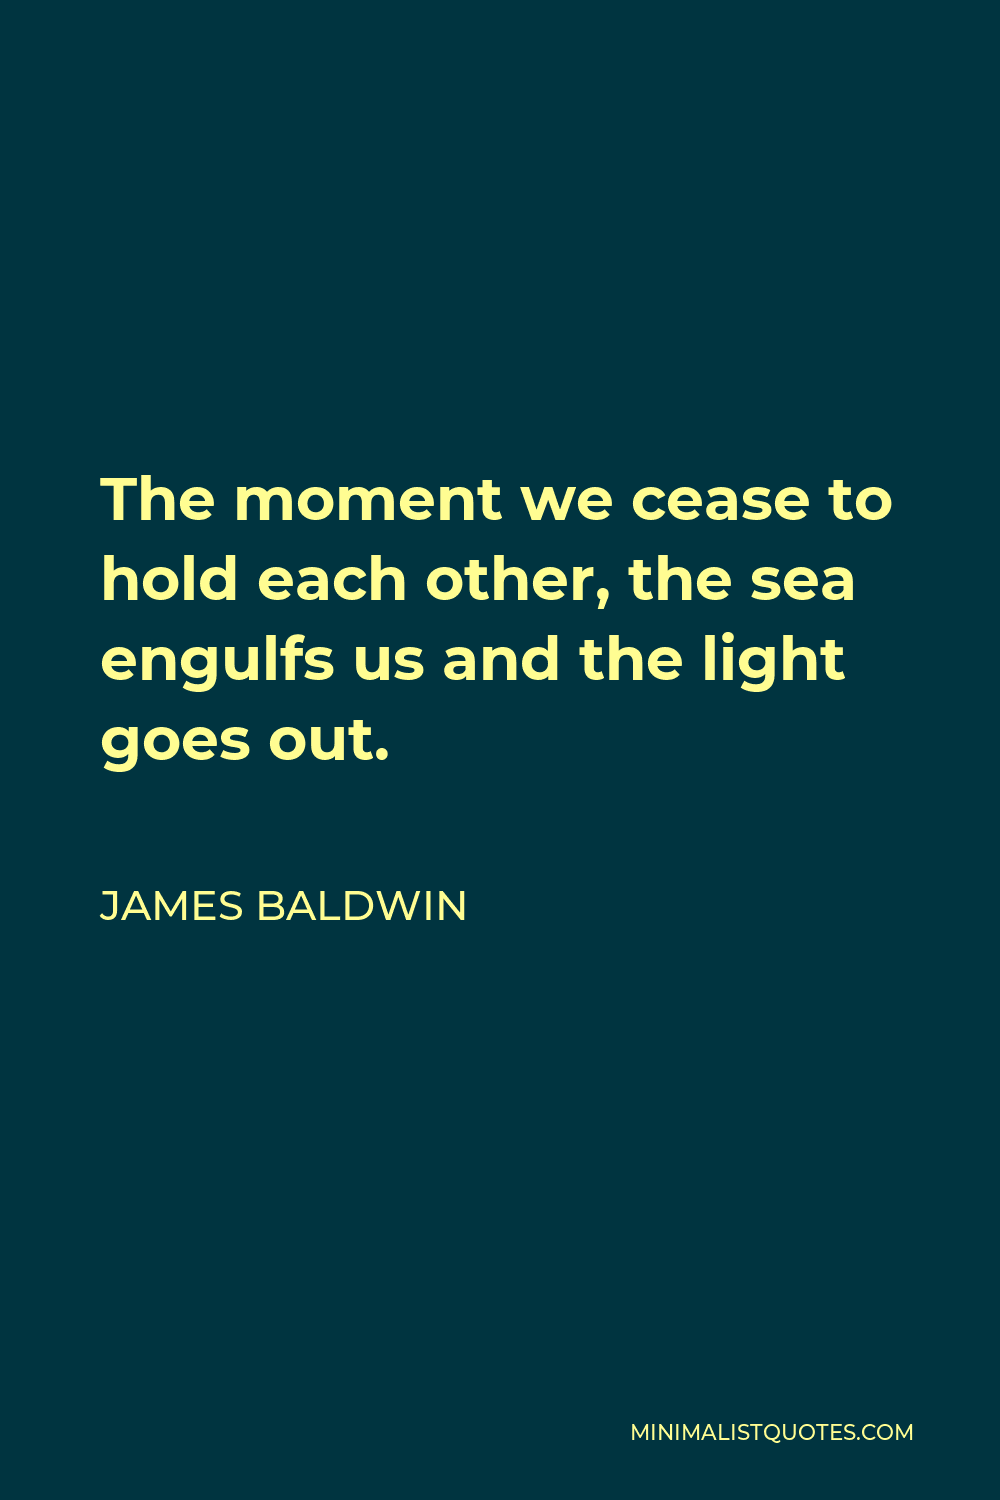 James Baldwin Quote - The moment we cease to hold each other, the sea engulfs us and the light goes out.